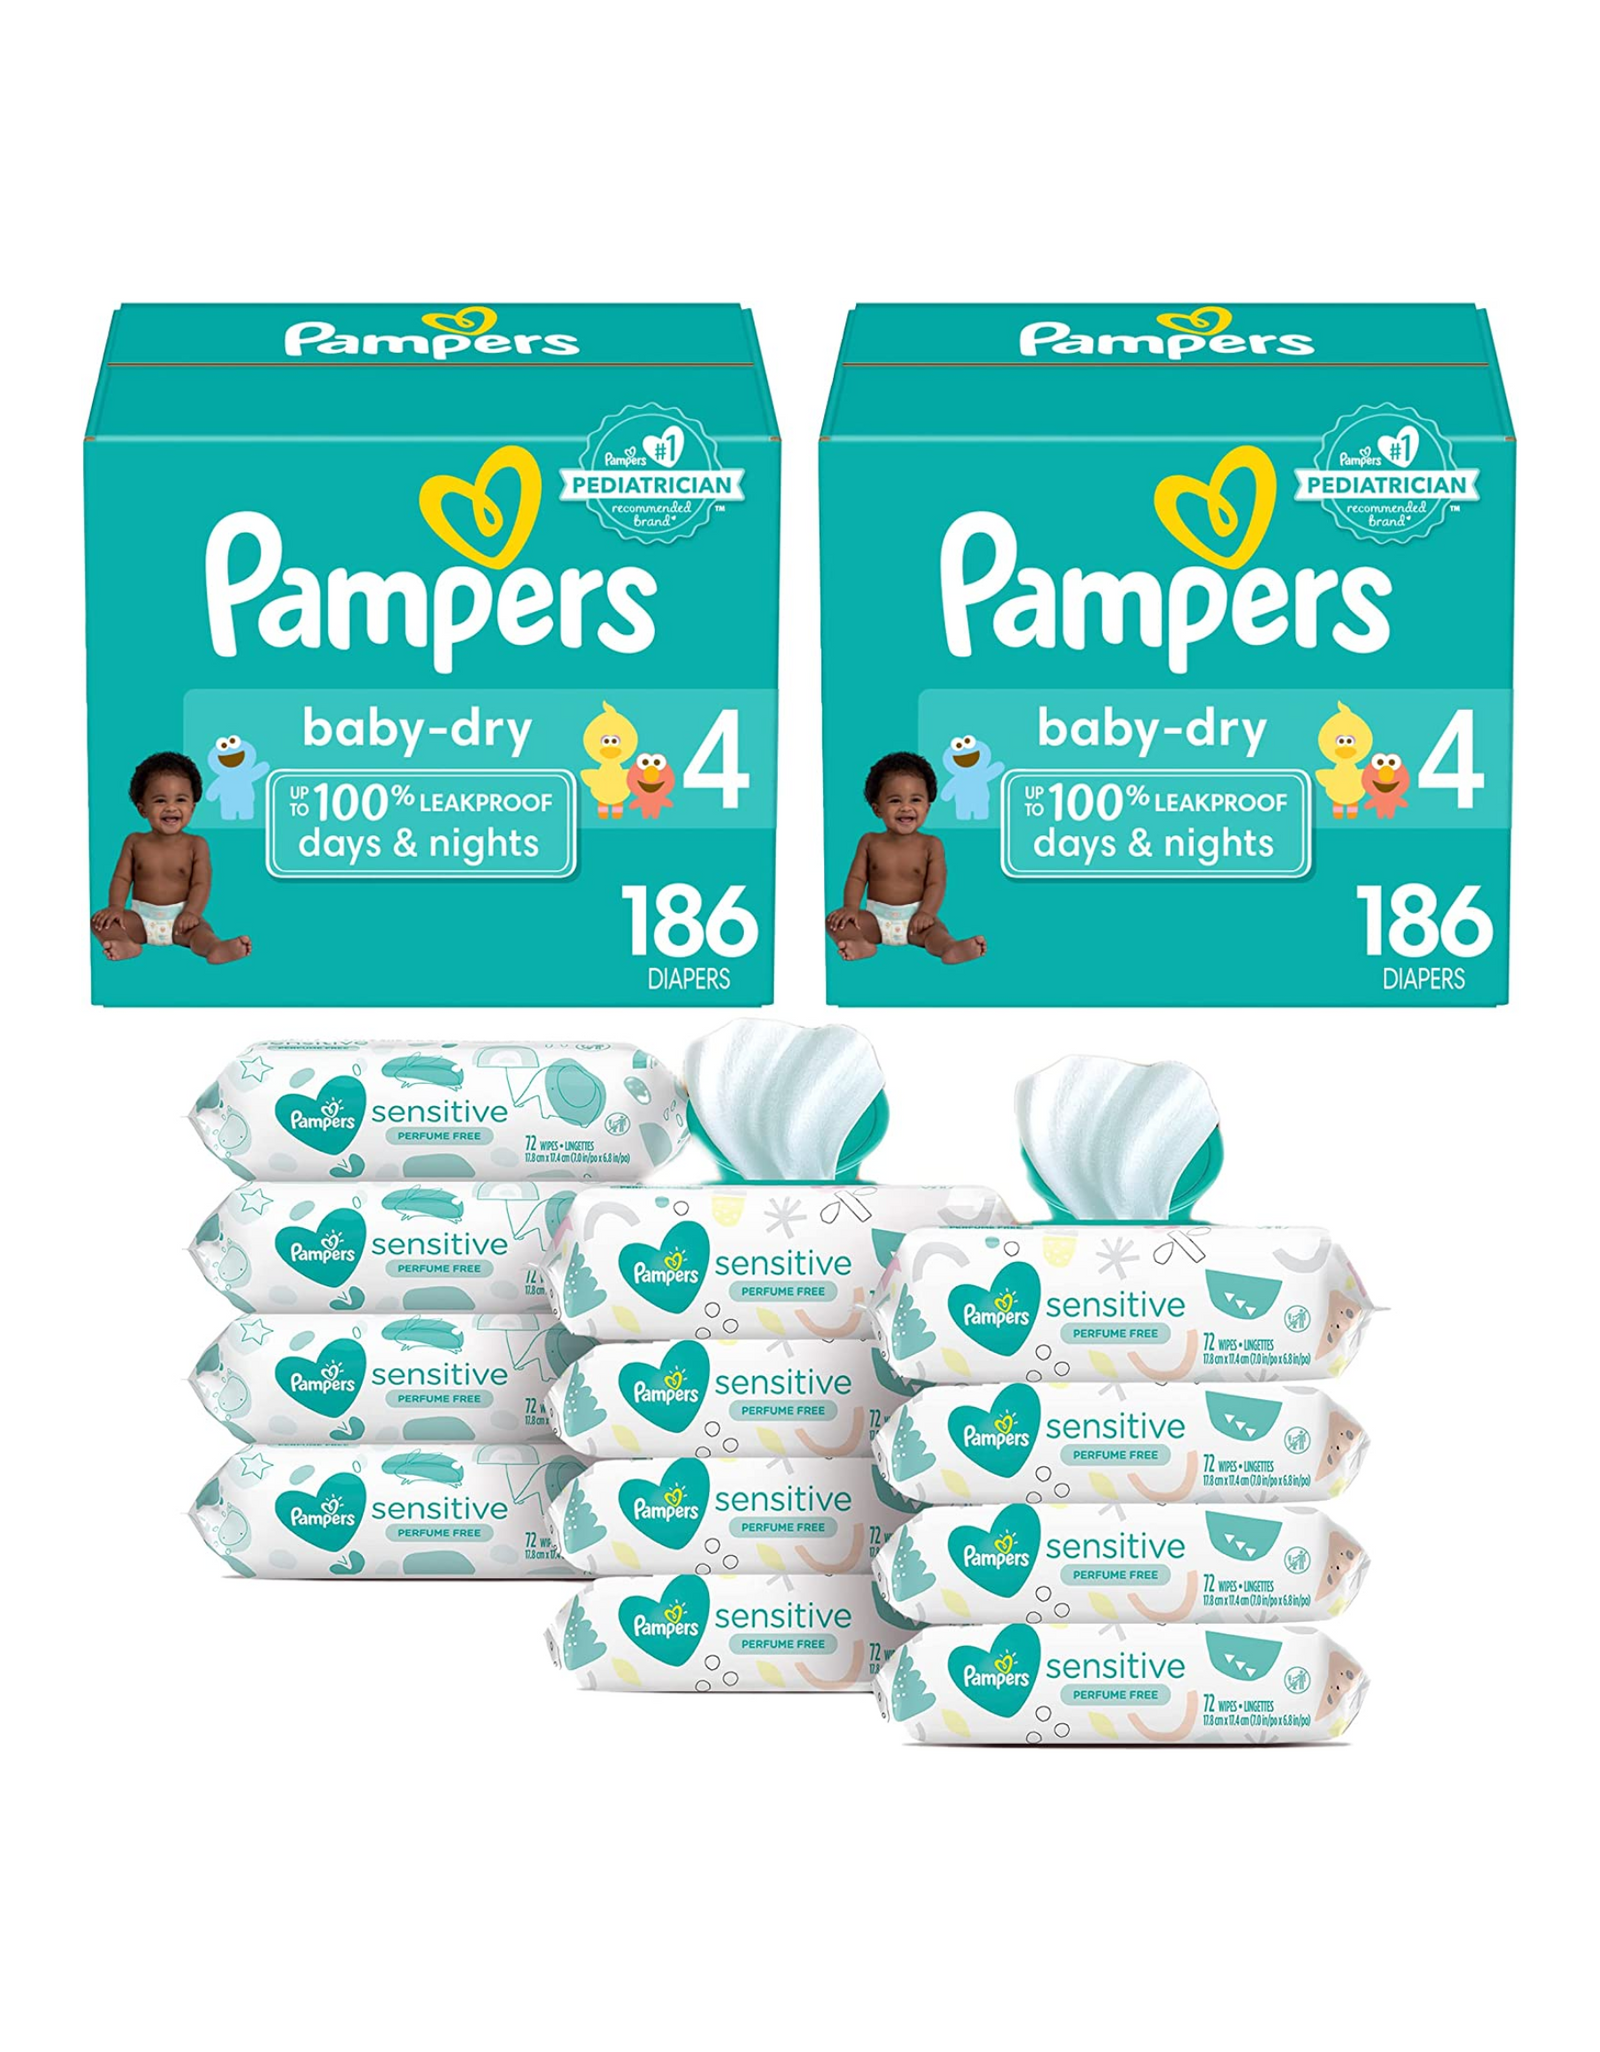 Pampers Baby Dry Disposable Baby Diapers Size 4, 186 Ct (2 Pack) with Sensitive Water Based Baby Wipes, 8 Pop-Top Packs + 4 Refills, 864 total wipes (12 Packs)